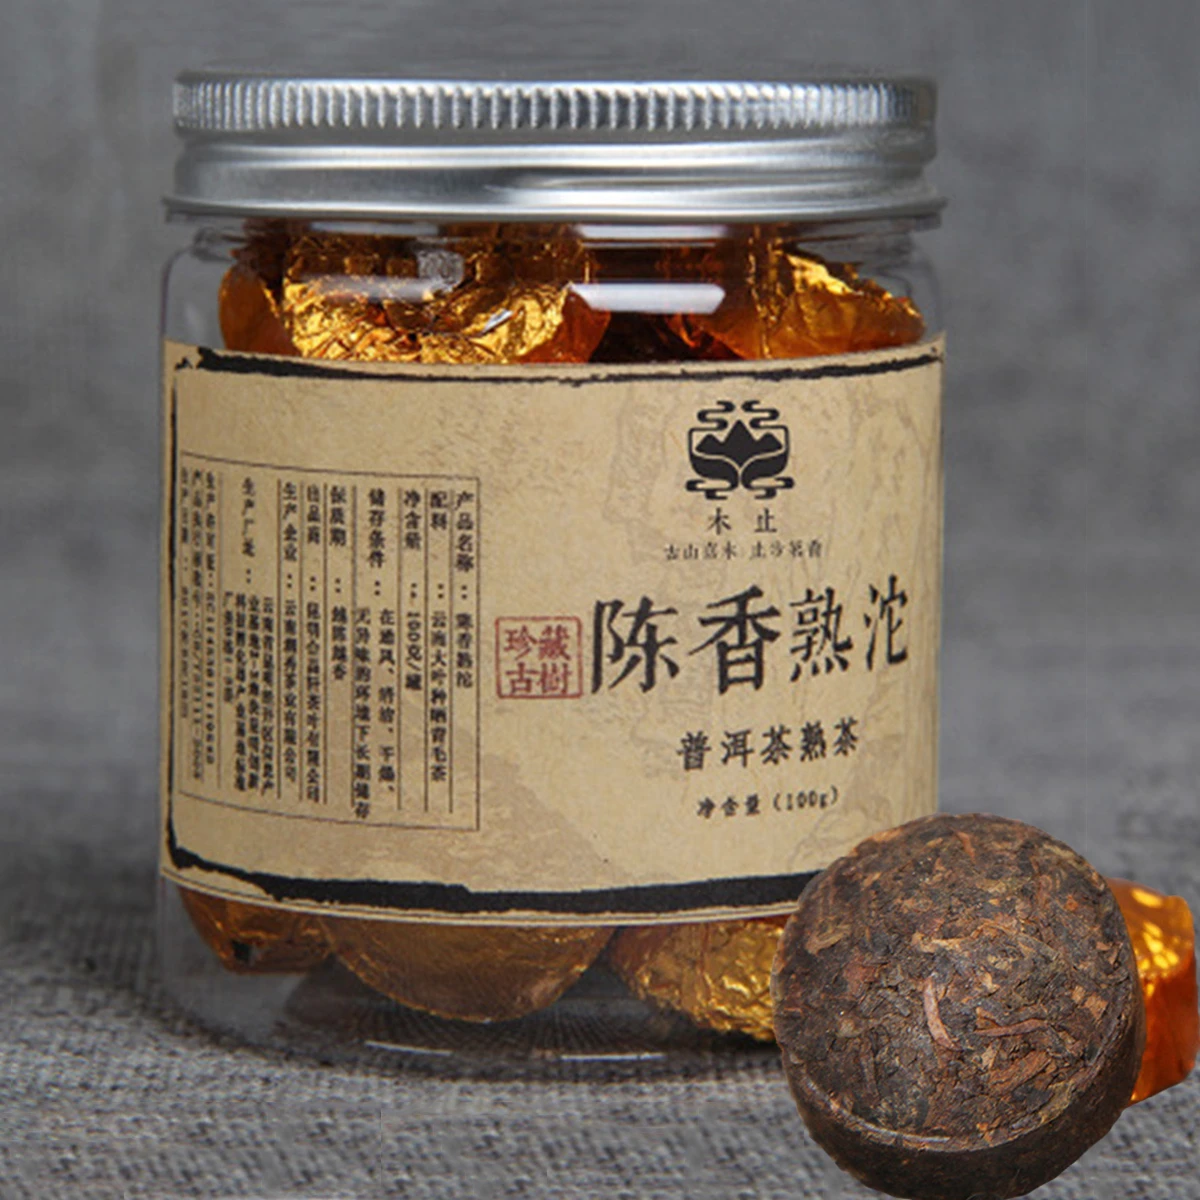 

100g Ripe Puer Tea Yunnan Small Canned Glutinous Ancient Fragrance Black Puer Tea Organic Natural Cooked Puer Tea